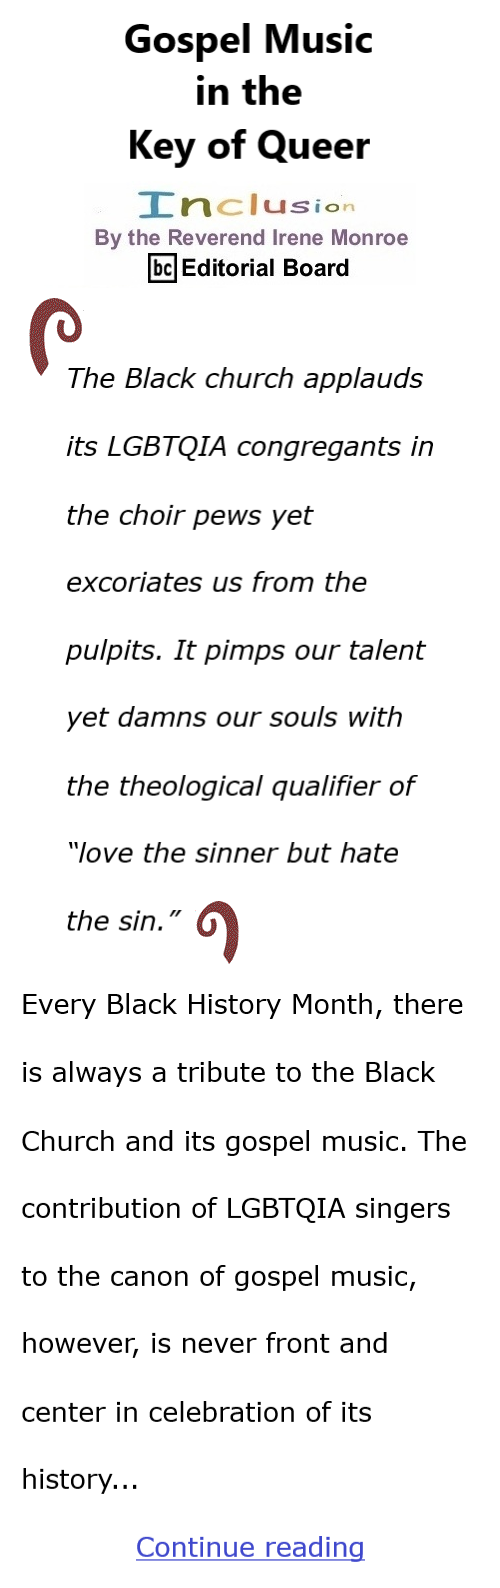 BlackCommentator.com Feb 29, 2024 - Issue 990: Black History Month: Gospel Music in the Key of Queer - Inclusion By The Reverend Irene Monroe, BC Editorial Board